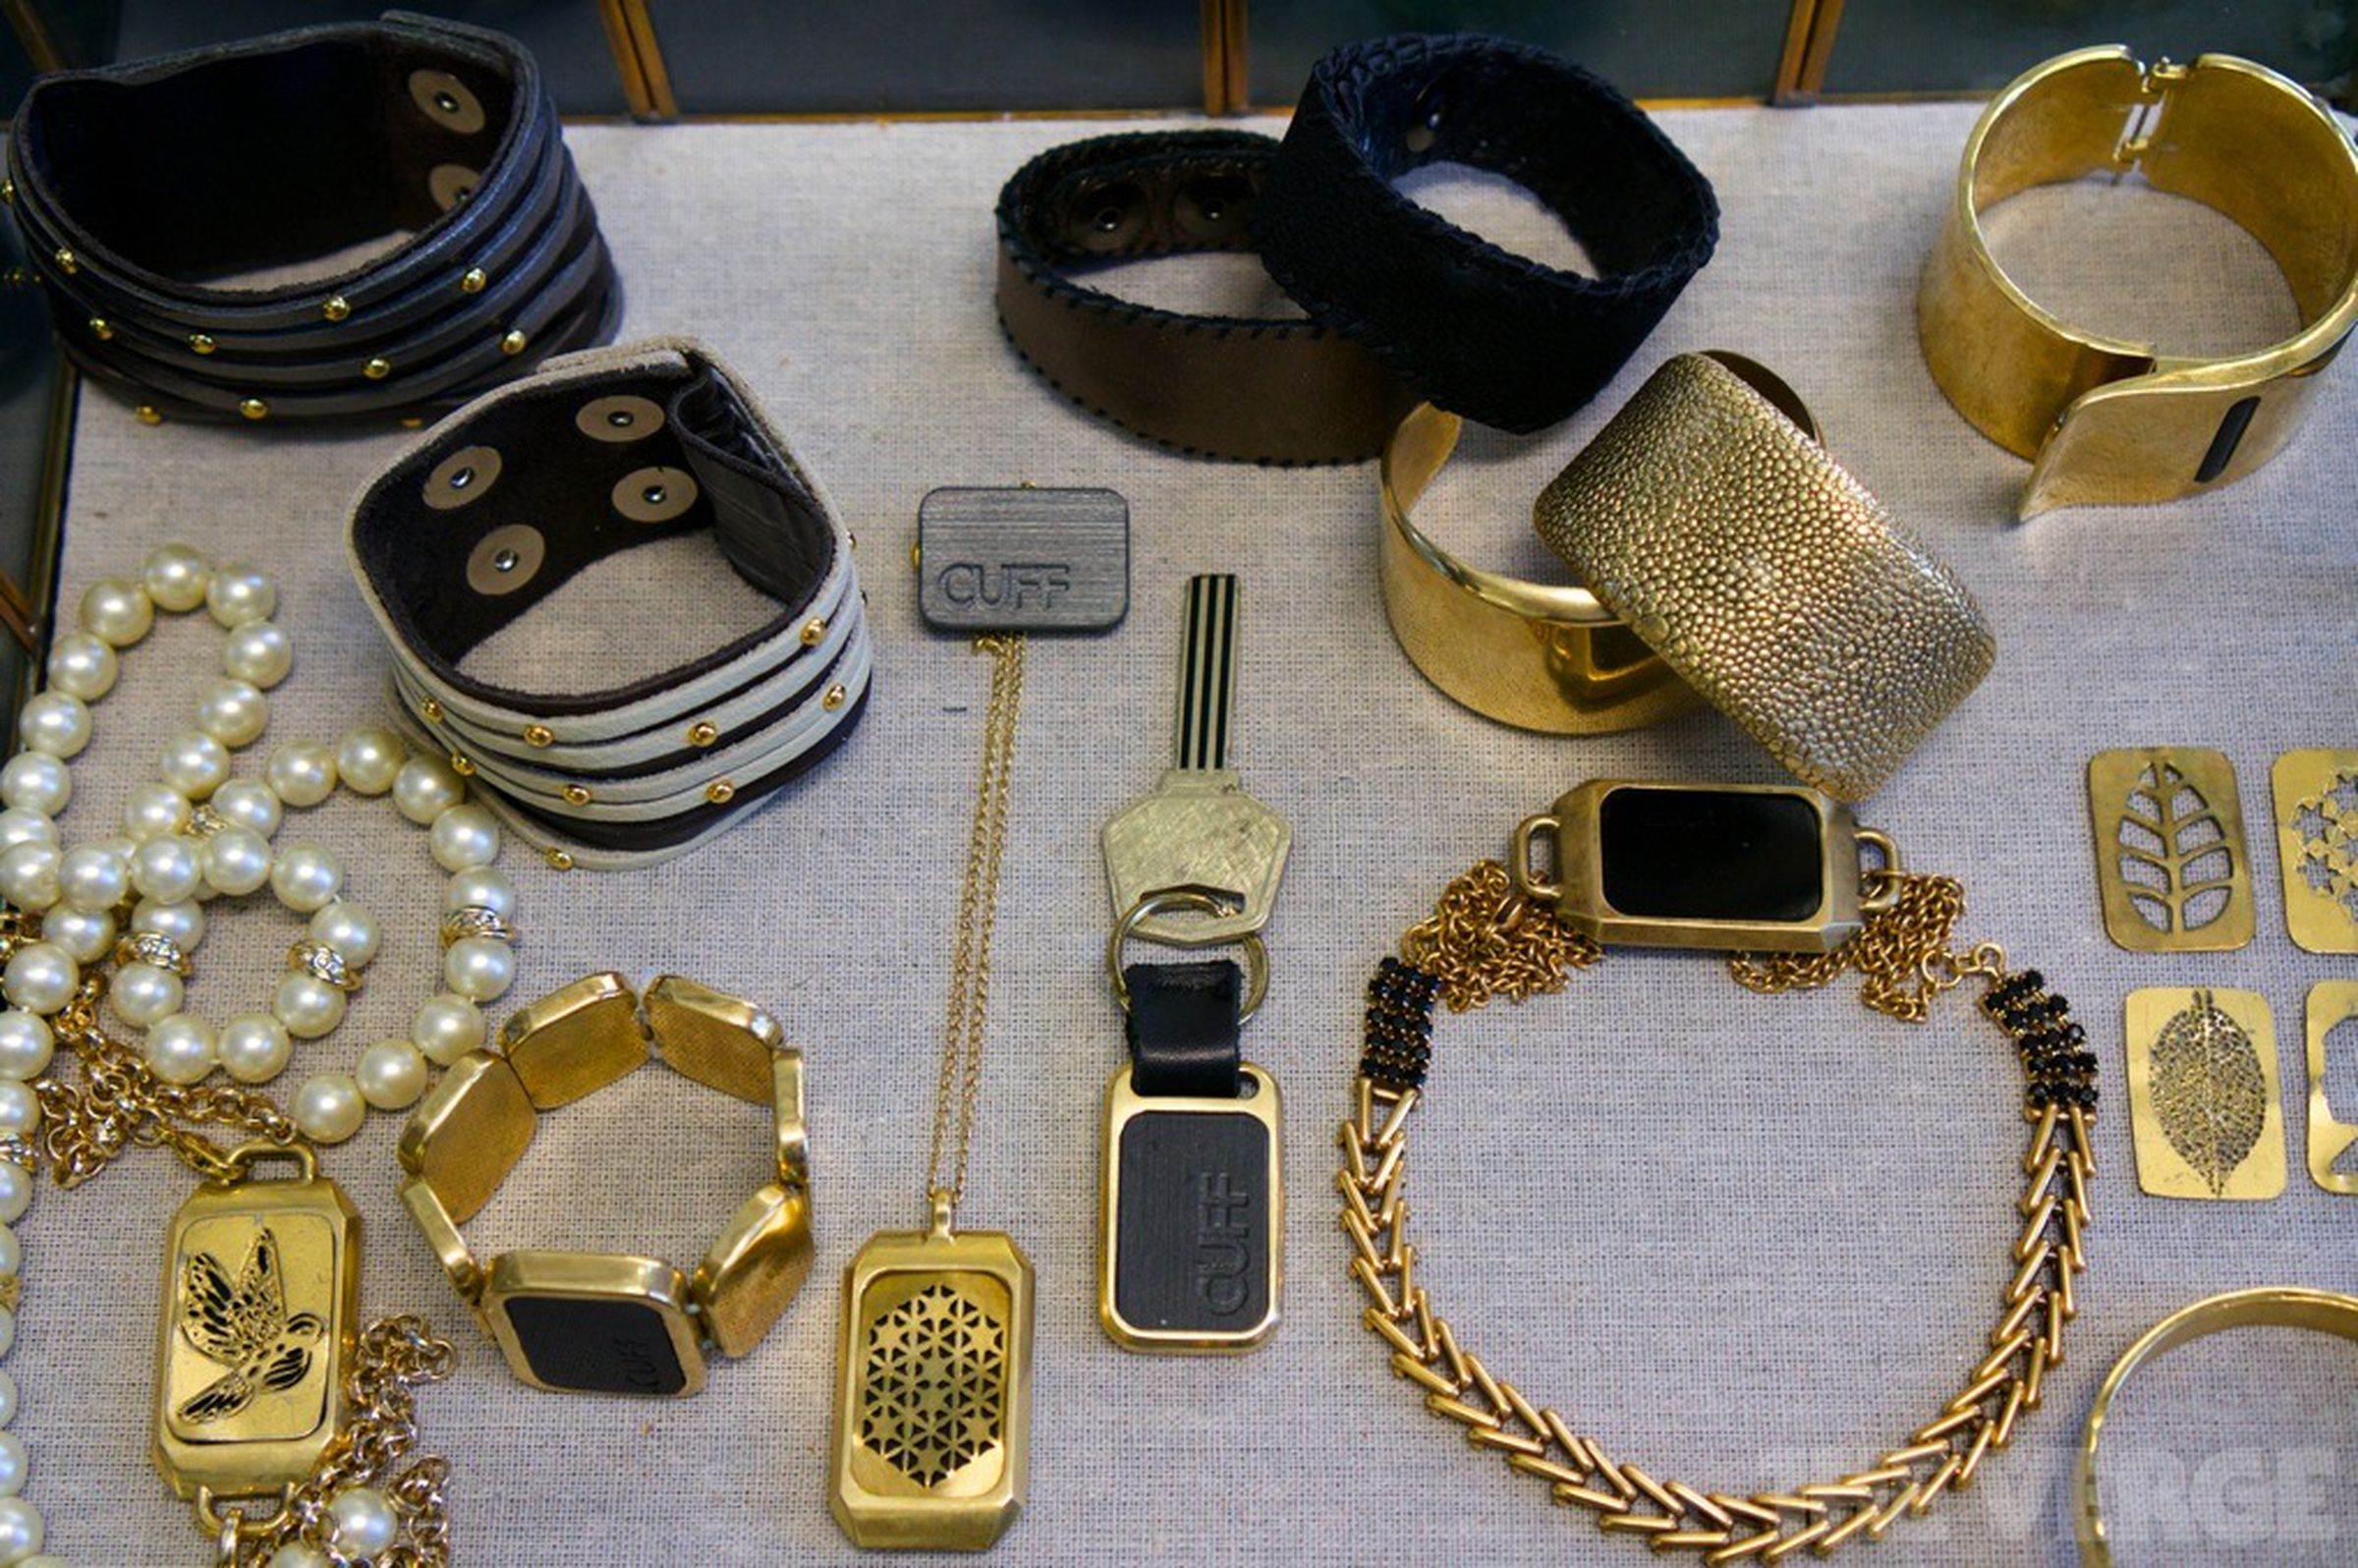 Cuff's collection of wearable technology